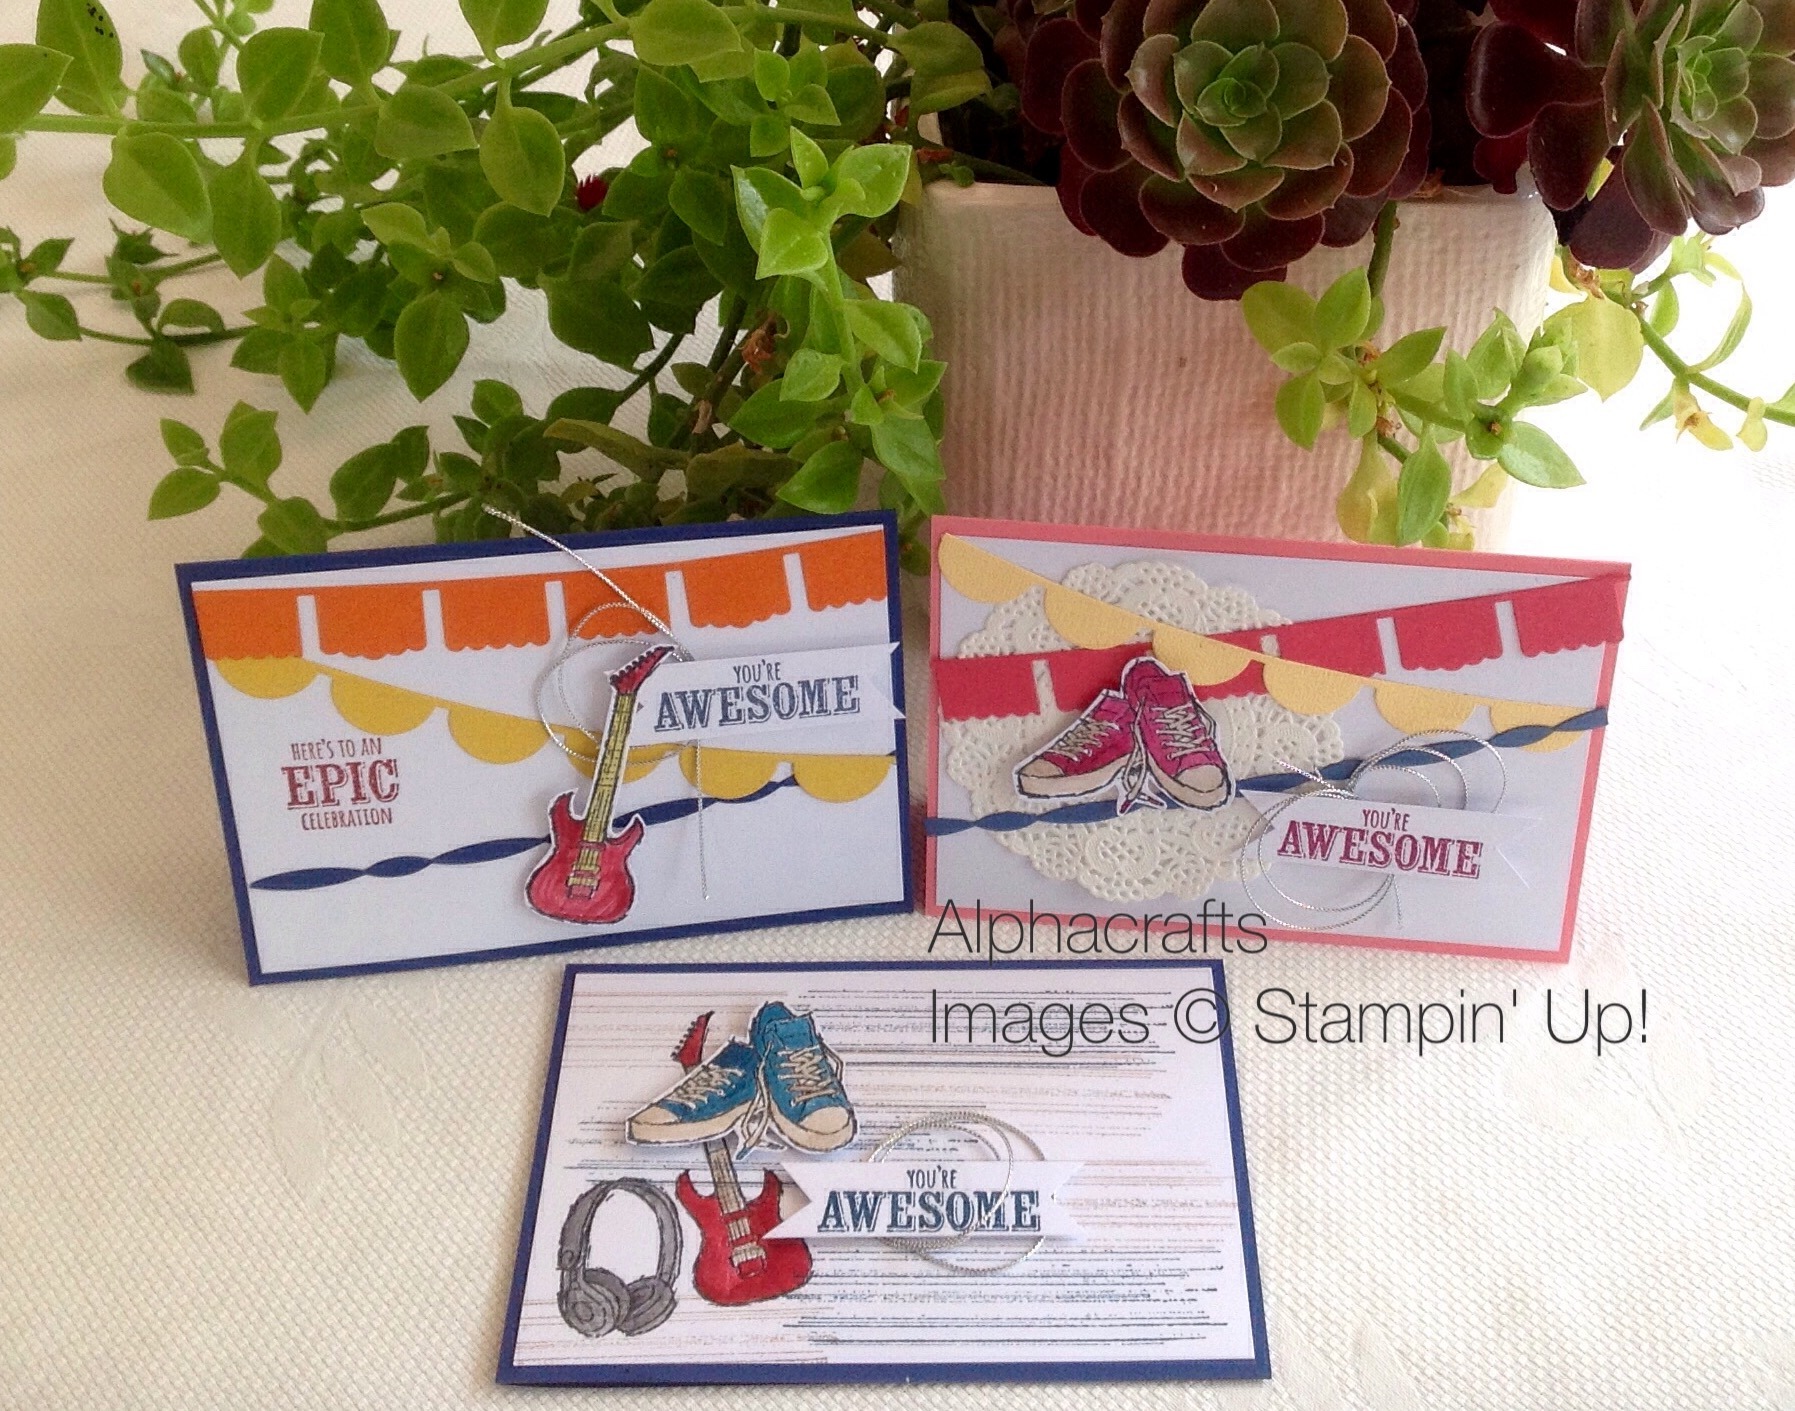 Handmade cards using the Epic Celebration stamp set from Stampin' Up!.